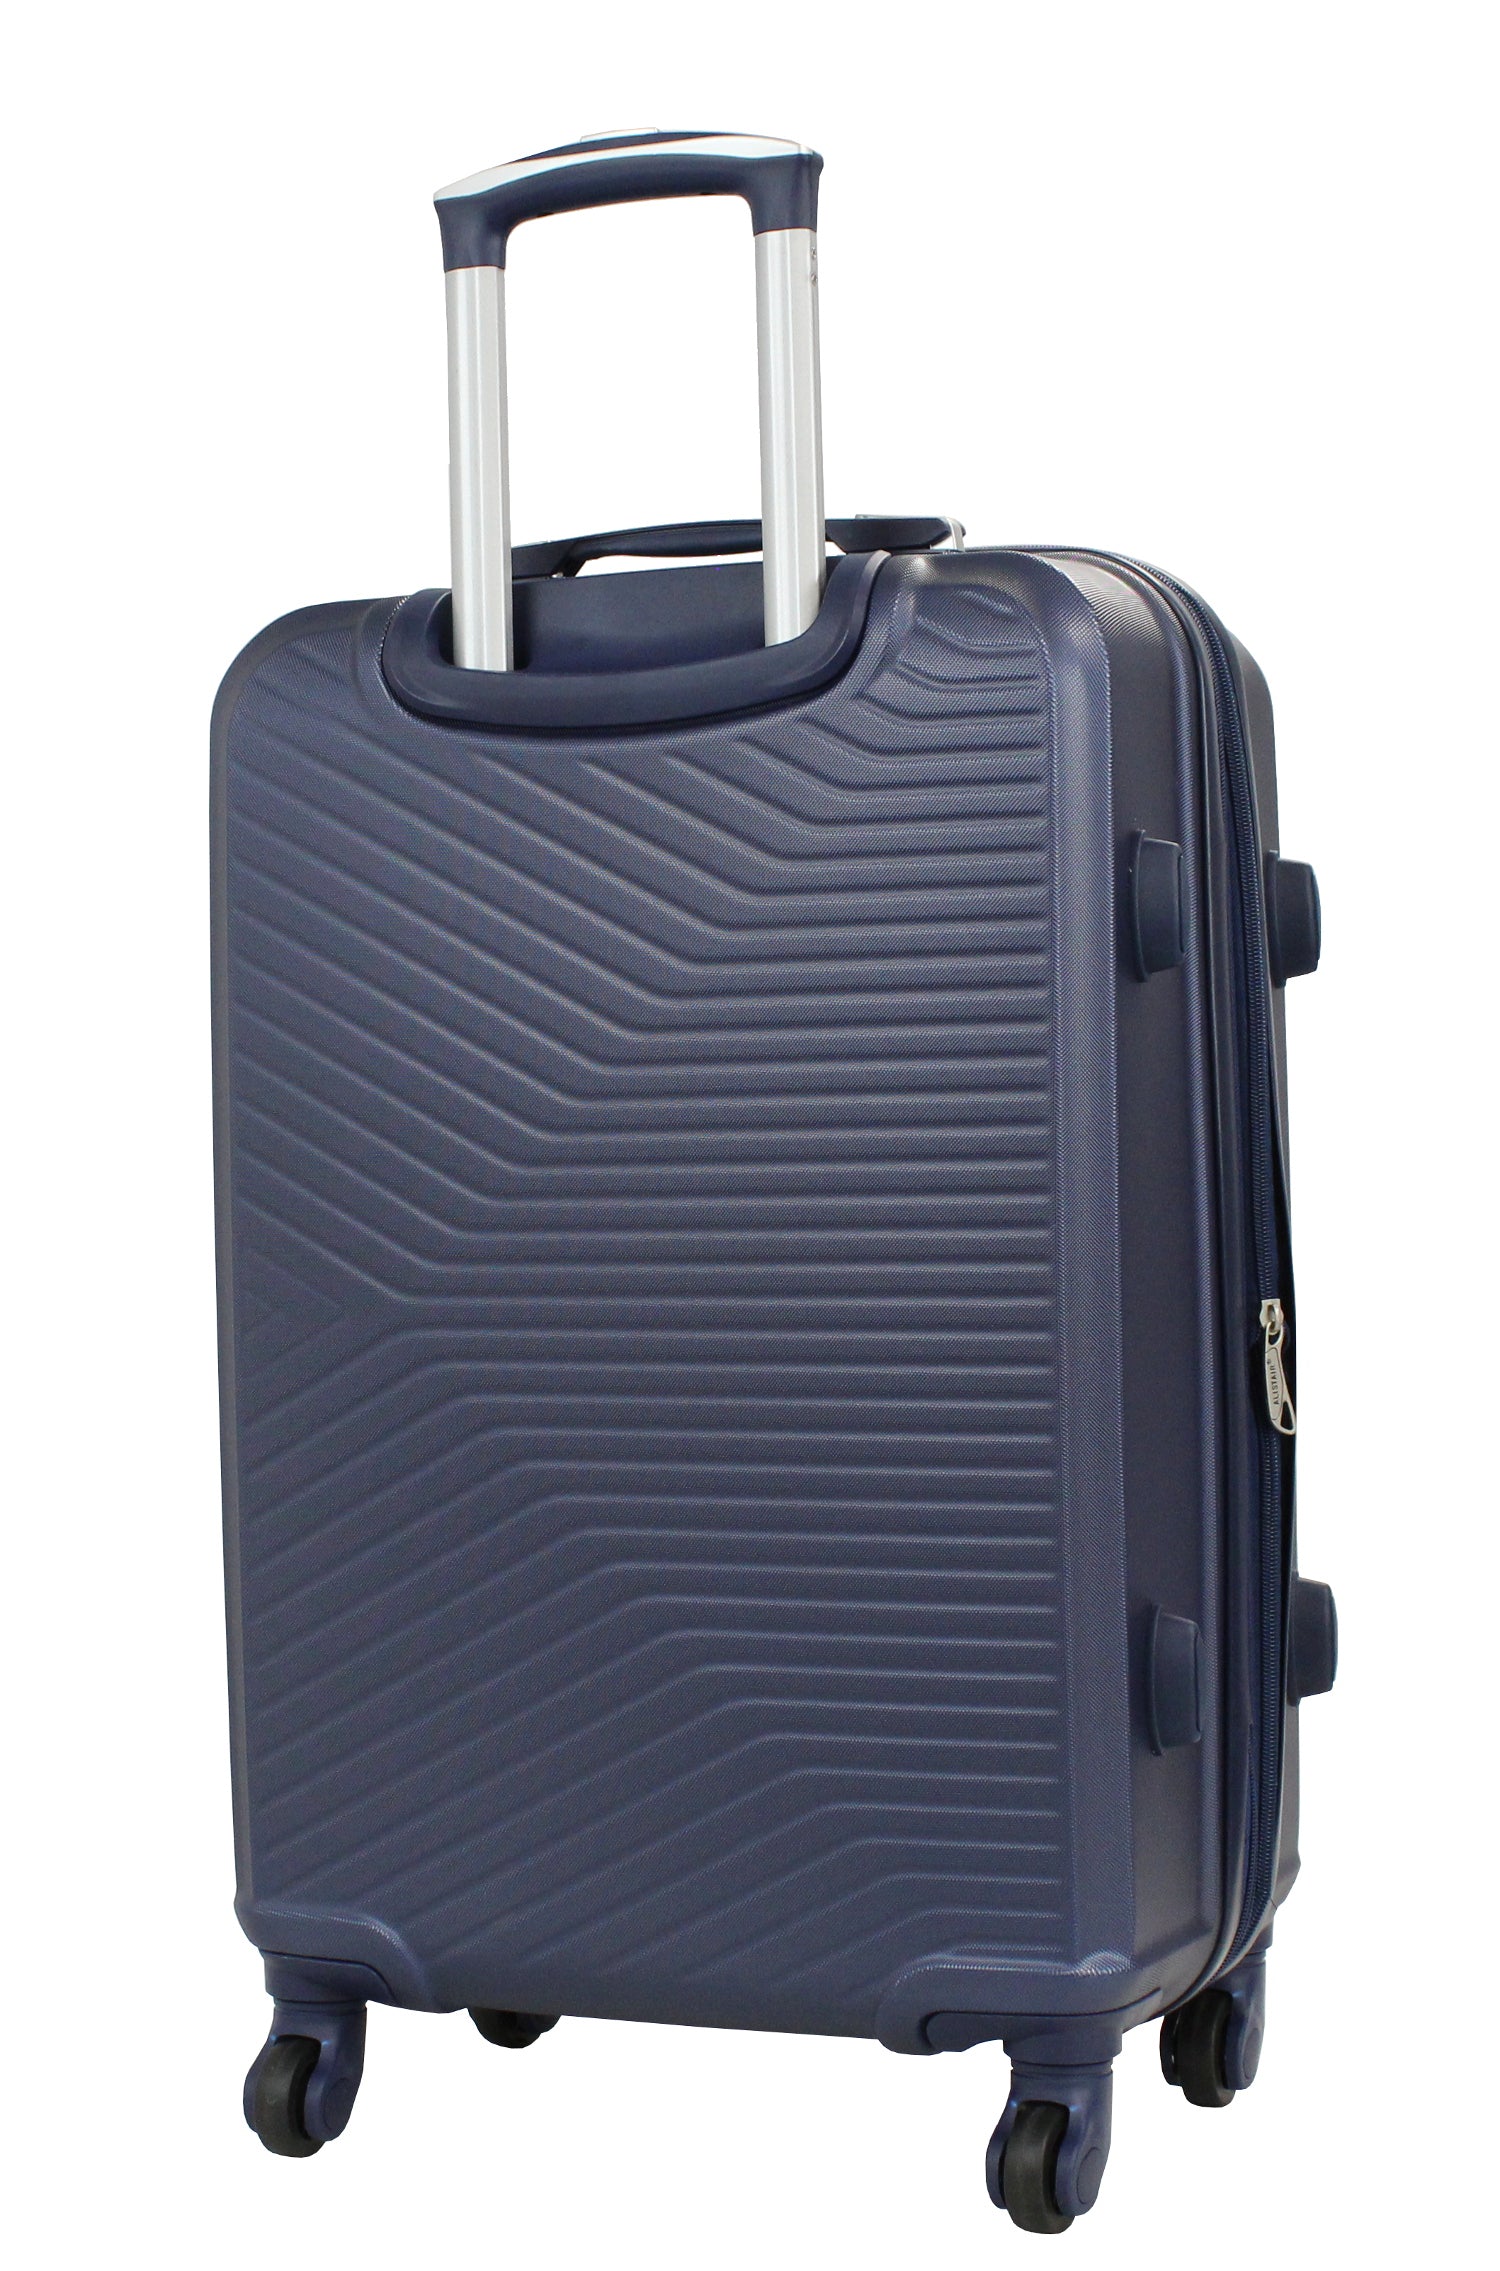 Alistair "Iron" Valise Taille Moyenne 65 cm